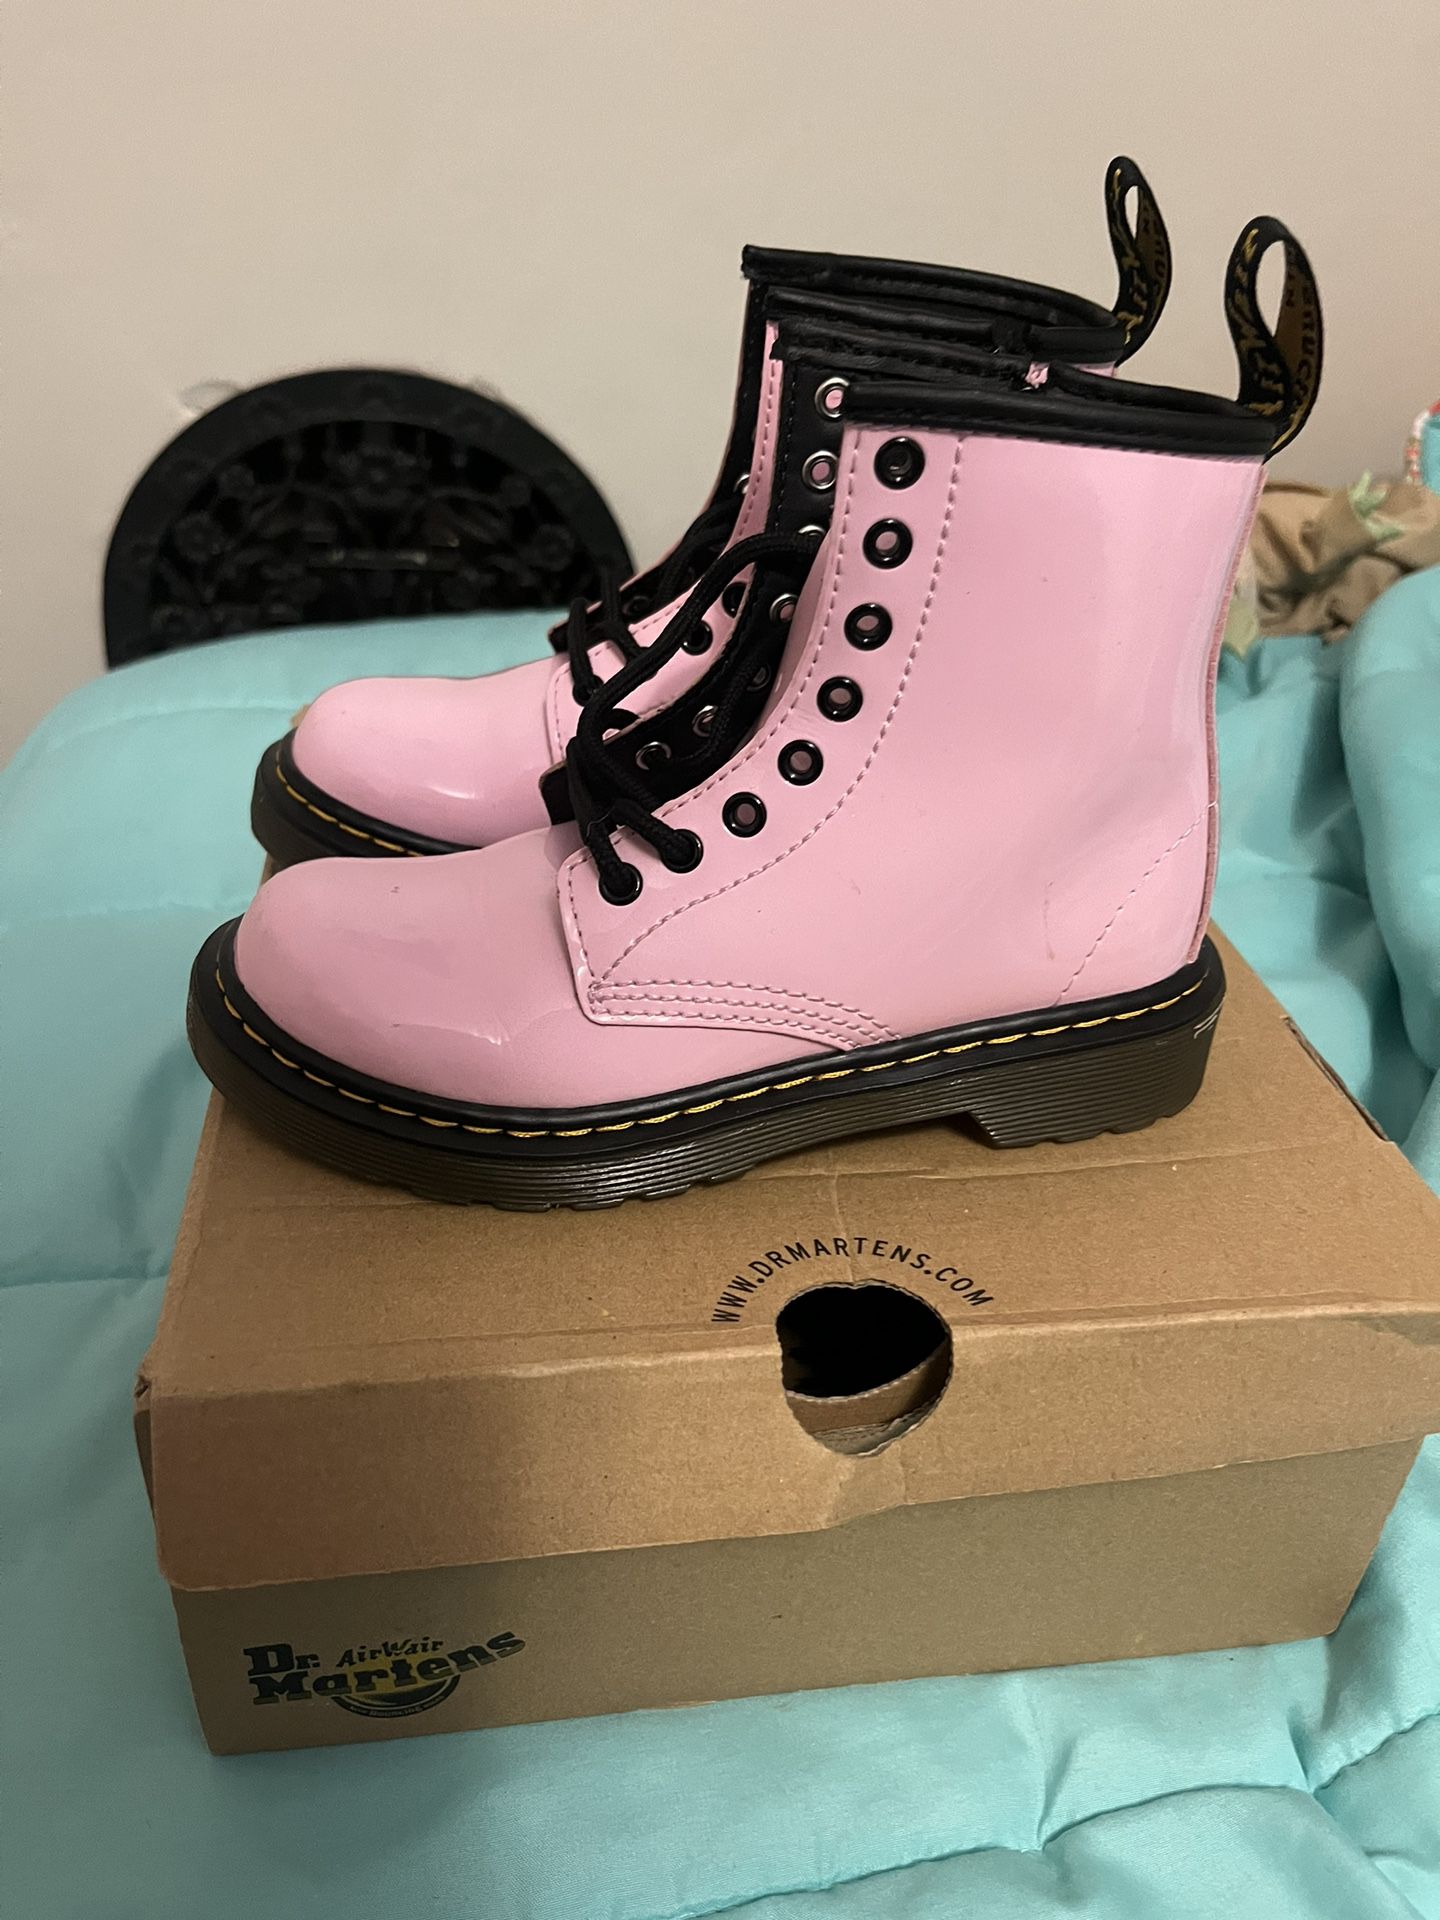 Patent leather pink Dr Martens 